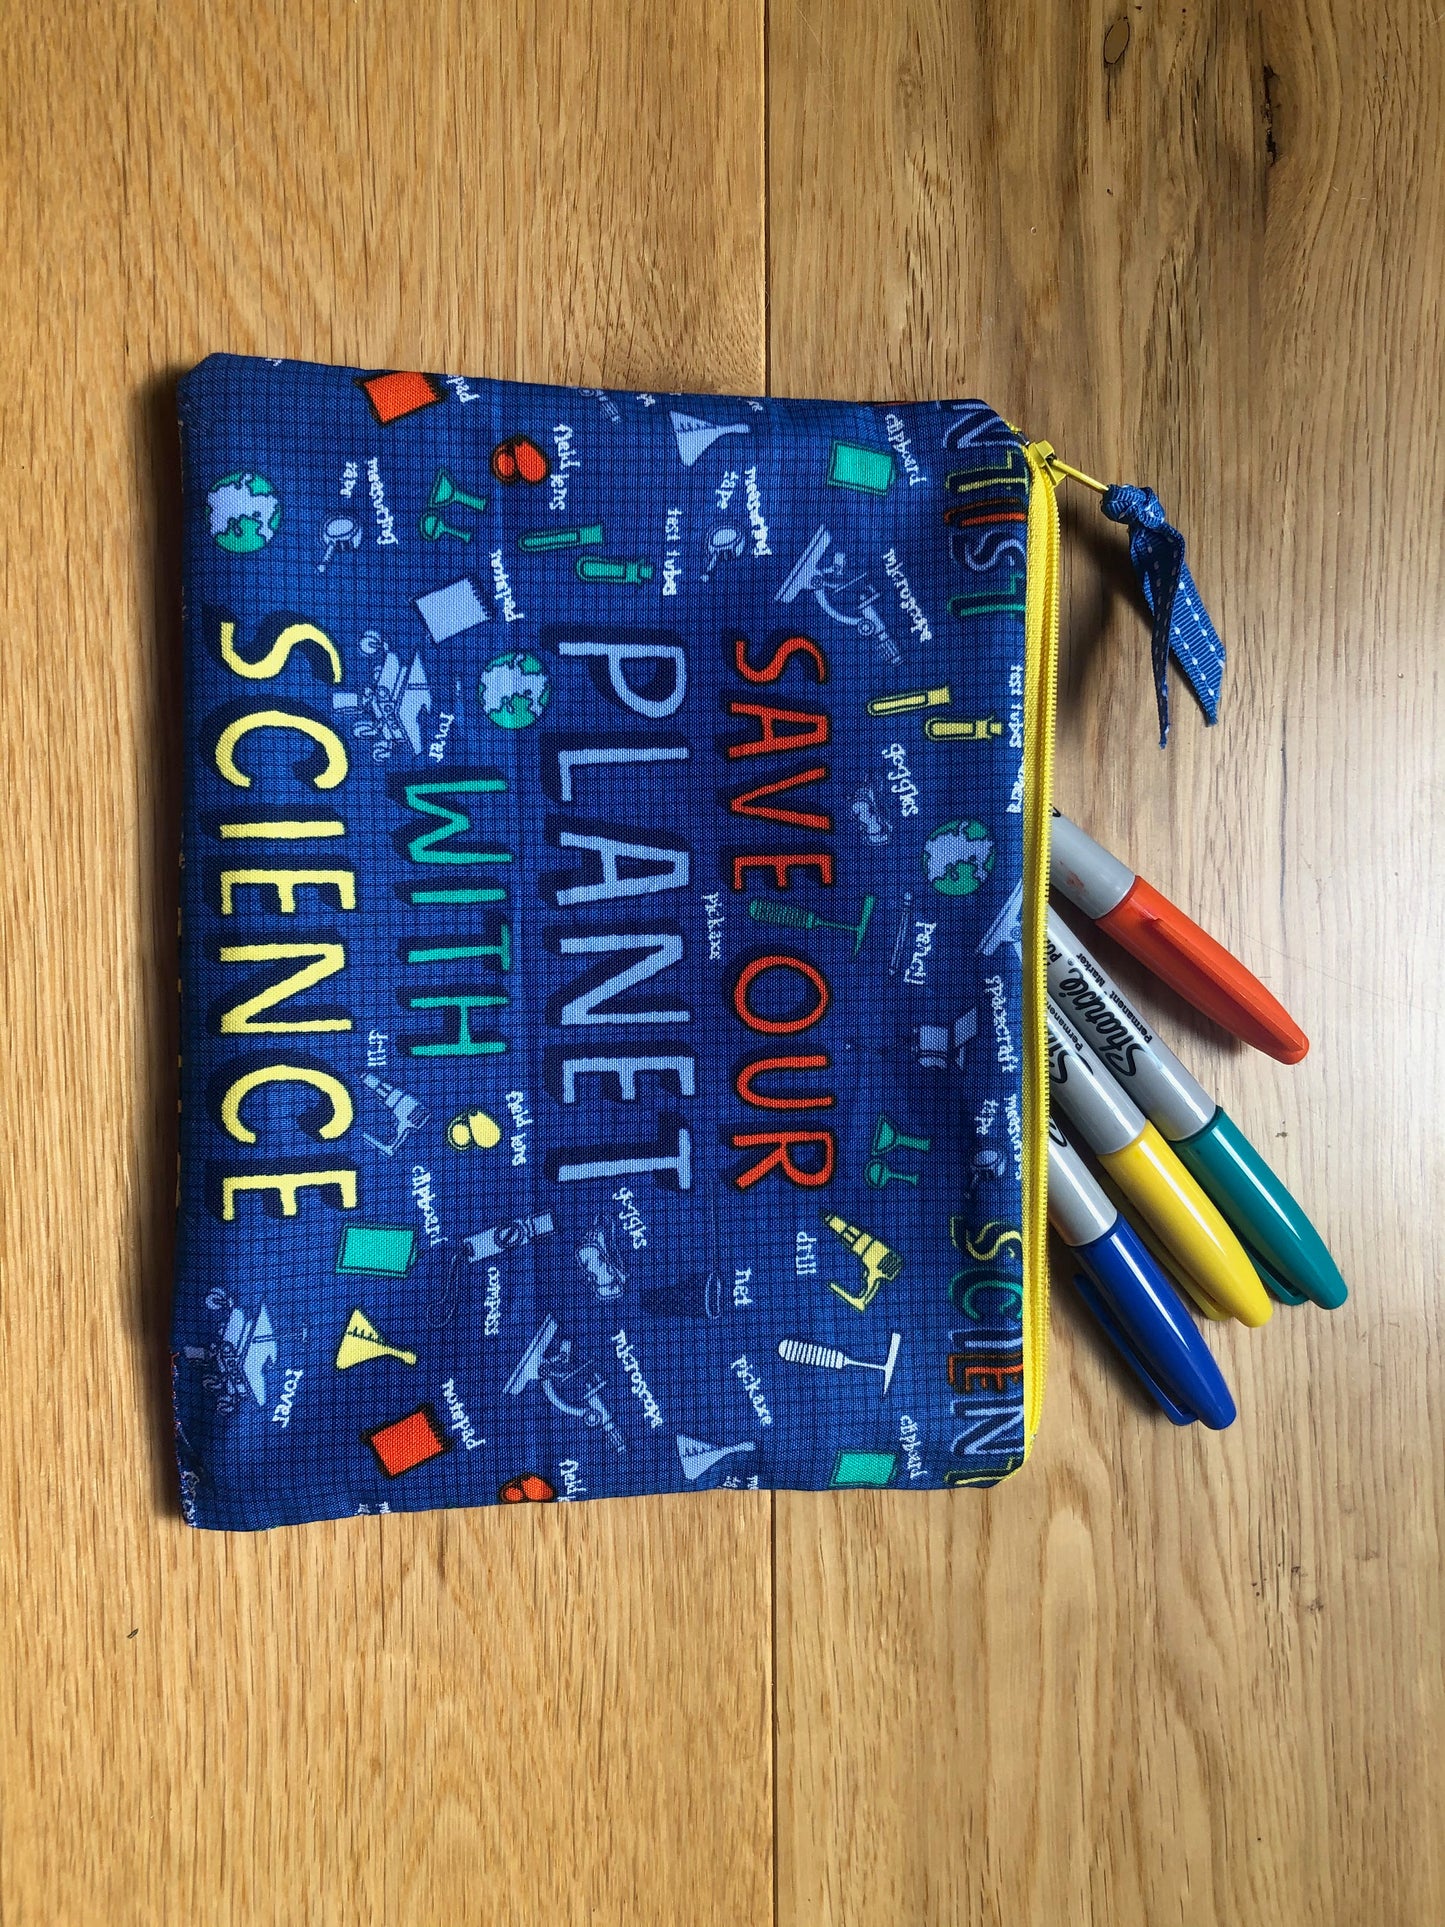 Zipper Pouch - Save the Planet with Science